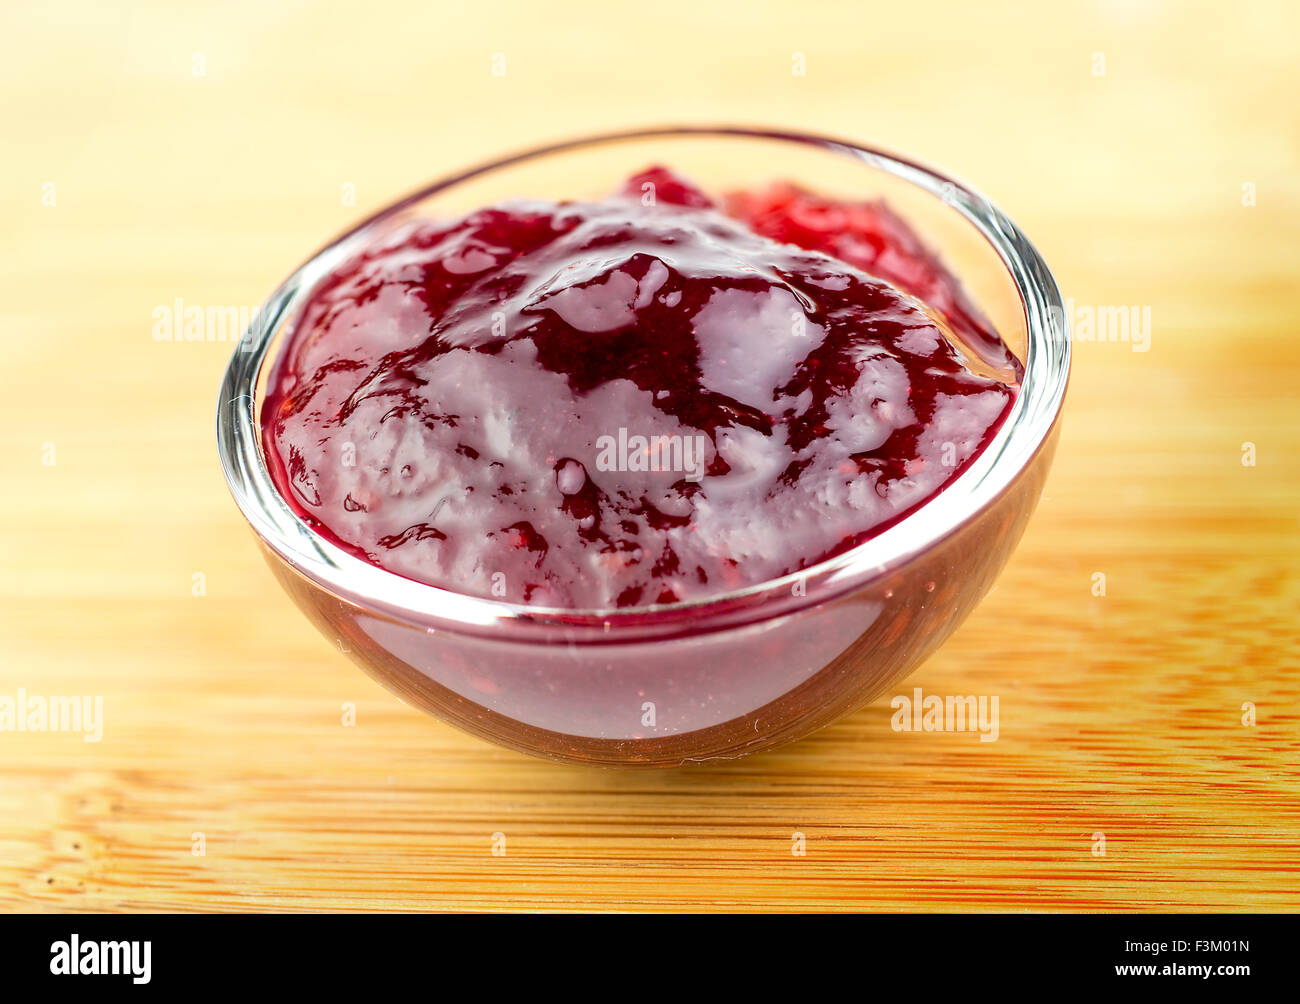 Tasty red raspberry jam in a bowl Stock Photo